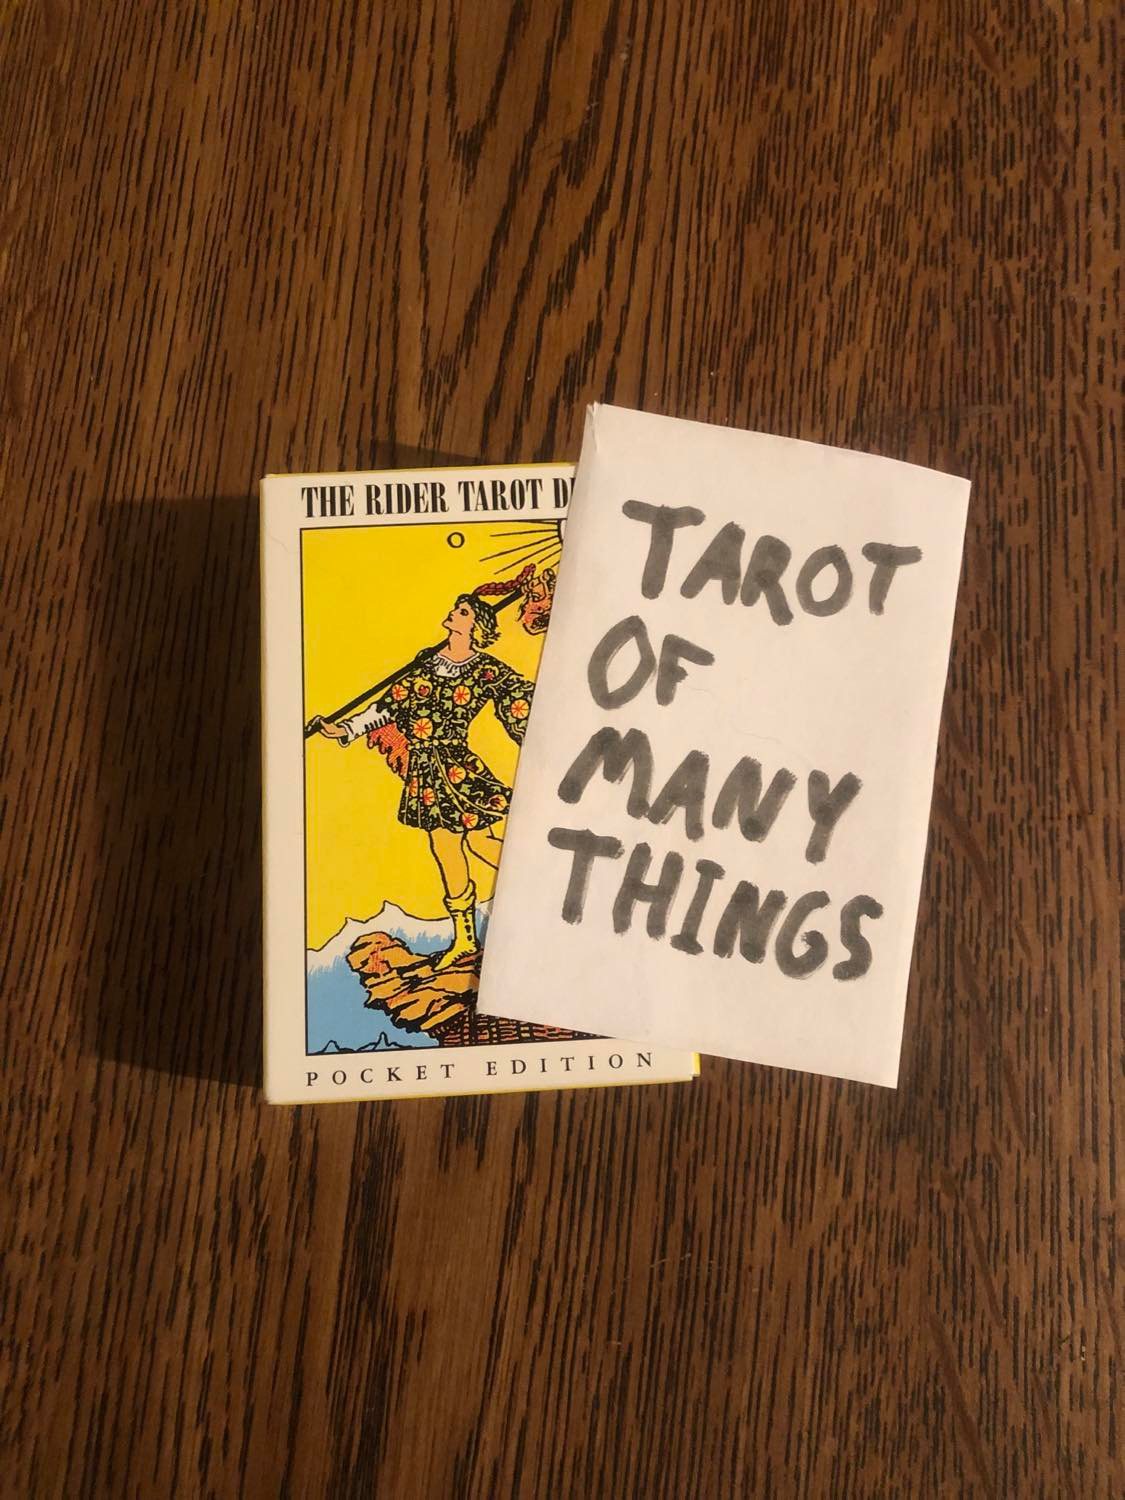 A scratchily markered paper saying Tarot of Many Things, on top of a rider waite tarot deck box, sitting on a wooden style table.